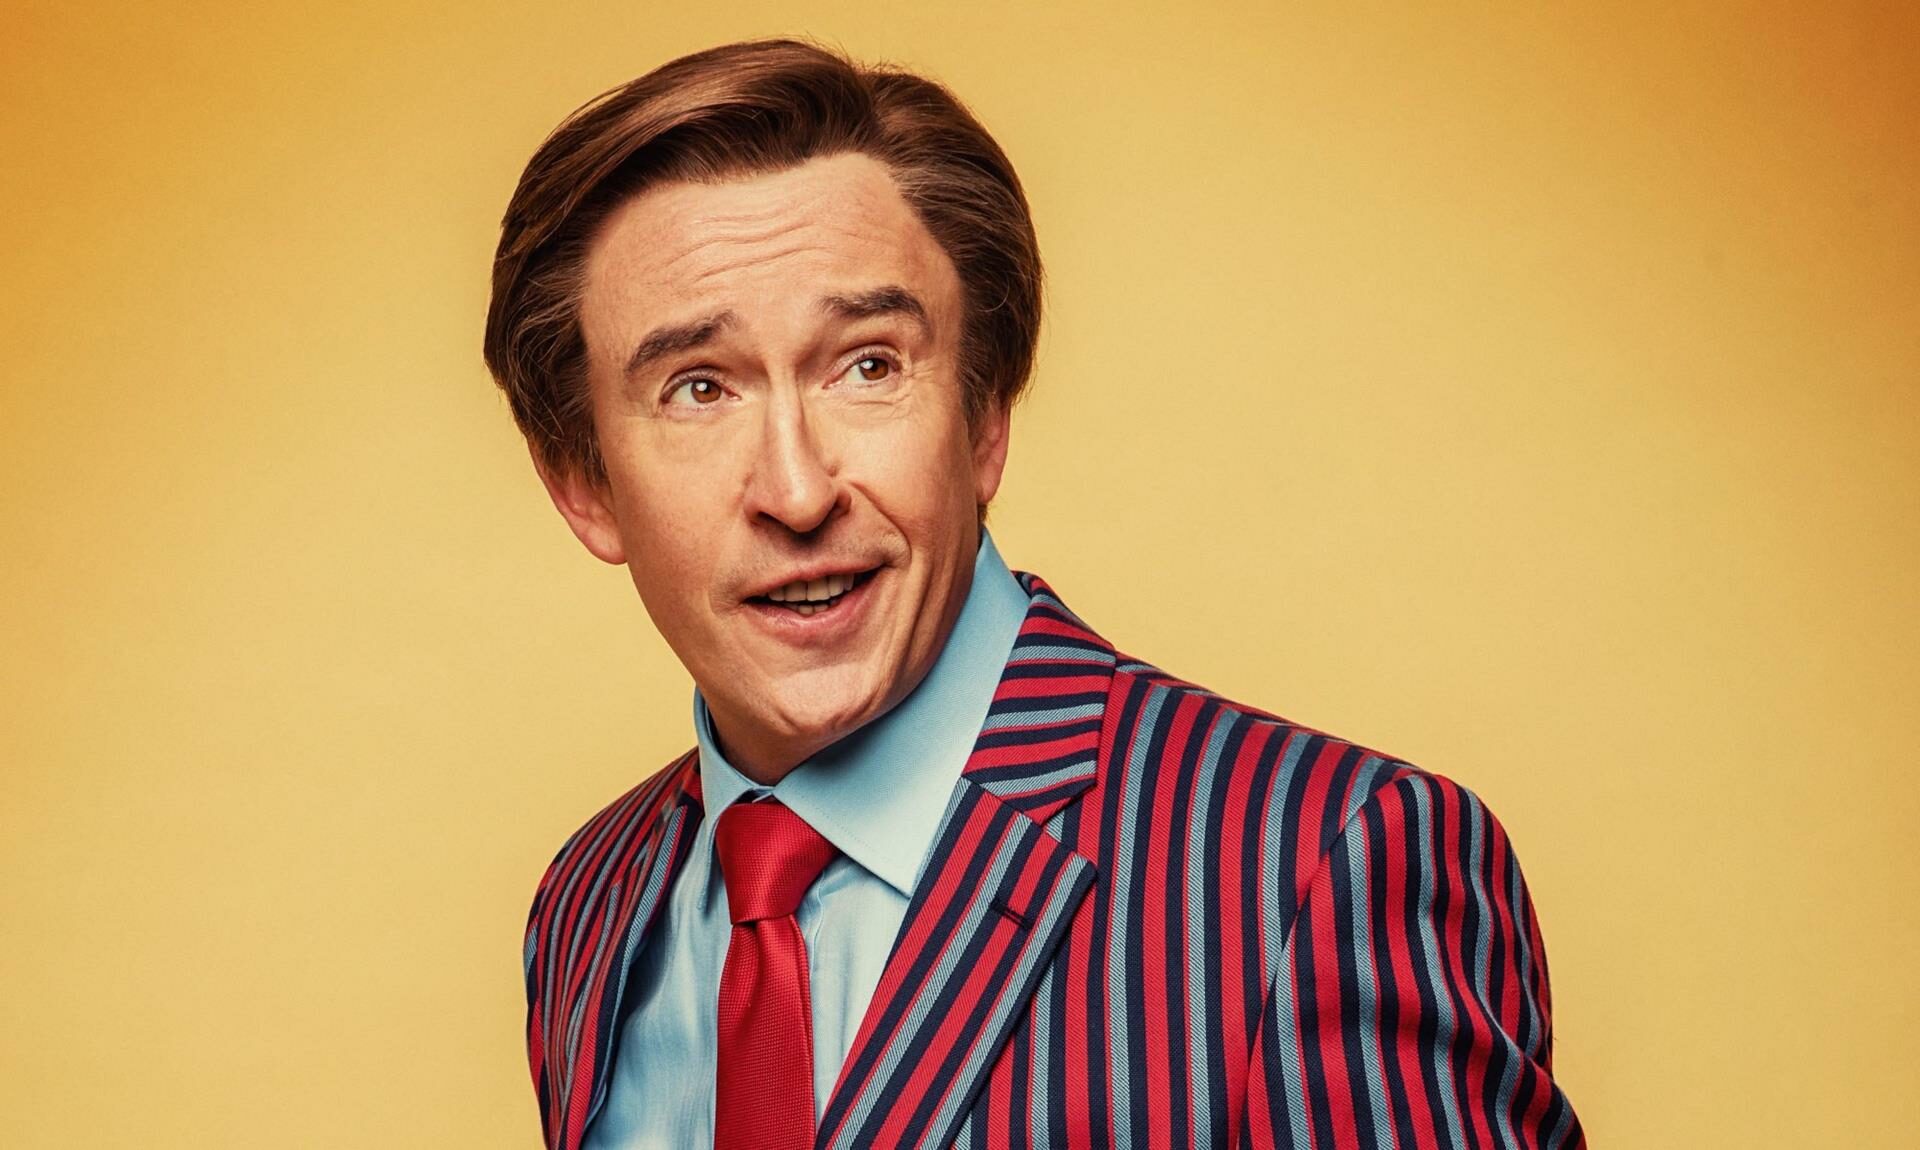 Alan Partridge promotional picture for live show "Strategem", coming to Aberdeen P&J Live